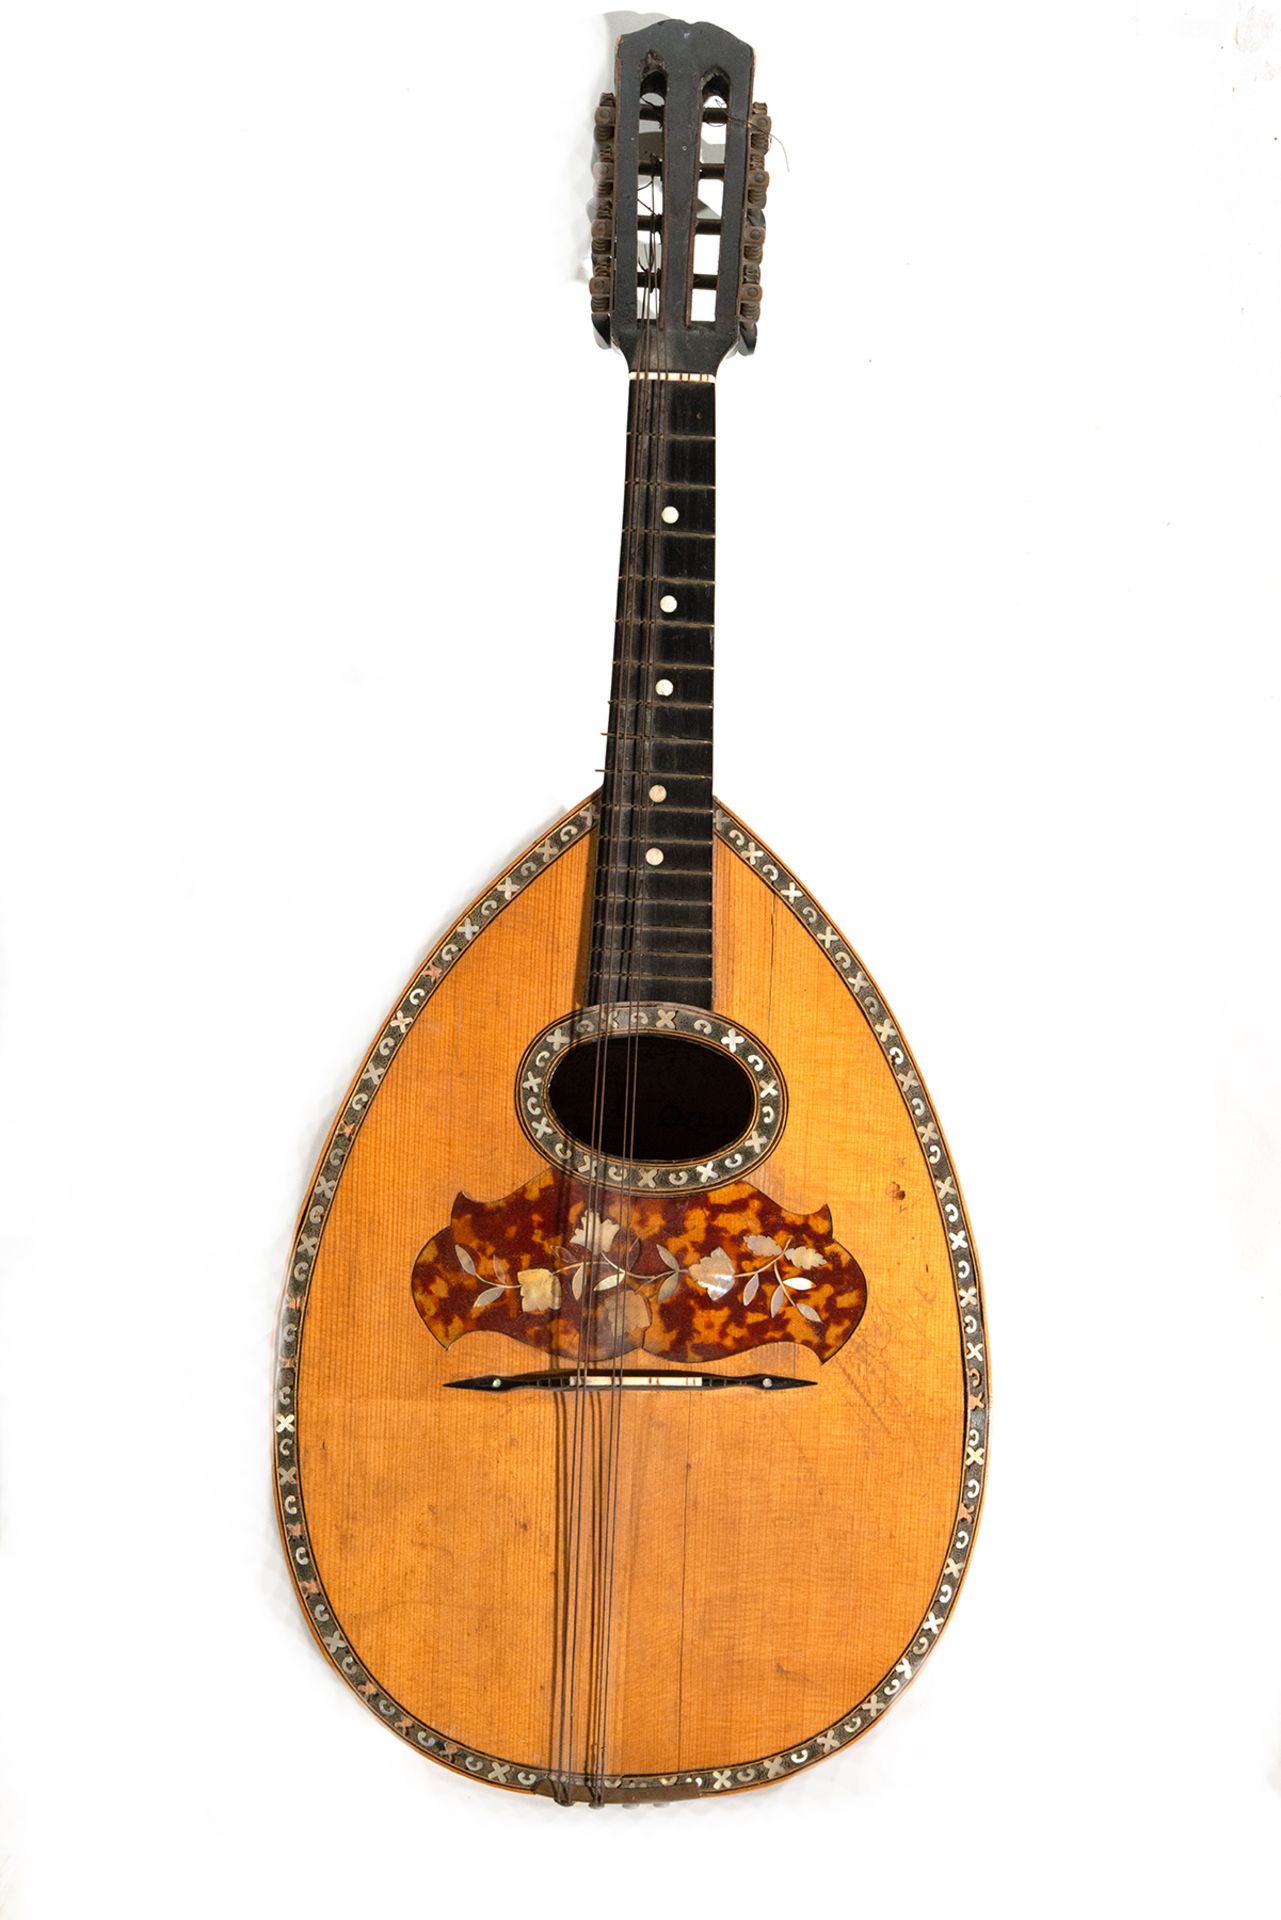 Lute in marquetry of fruit and mother-of-pearl, XIX - XX century